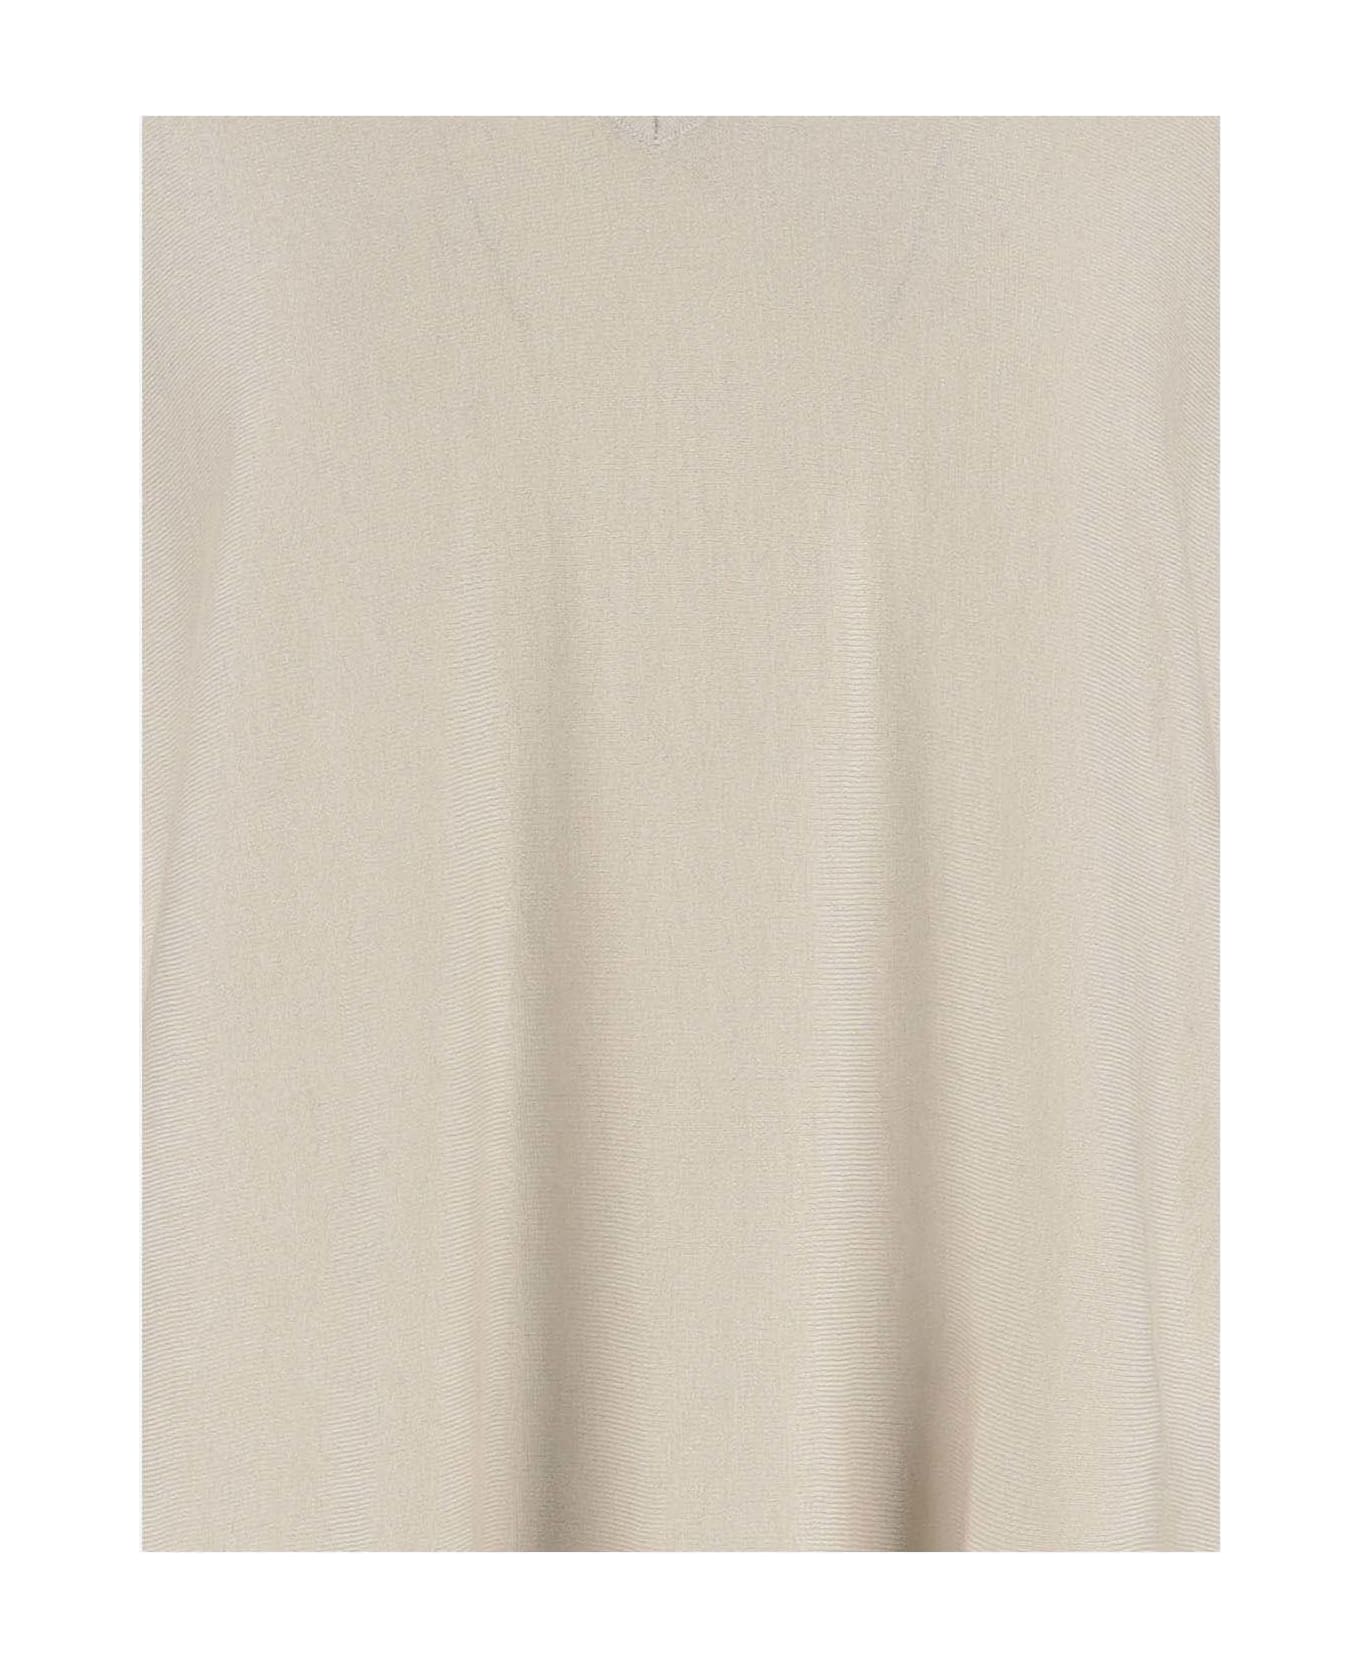 Wild Cashmere Silk And Cashmere Blend Pullover - Ivory